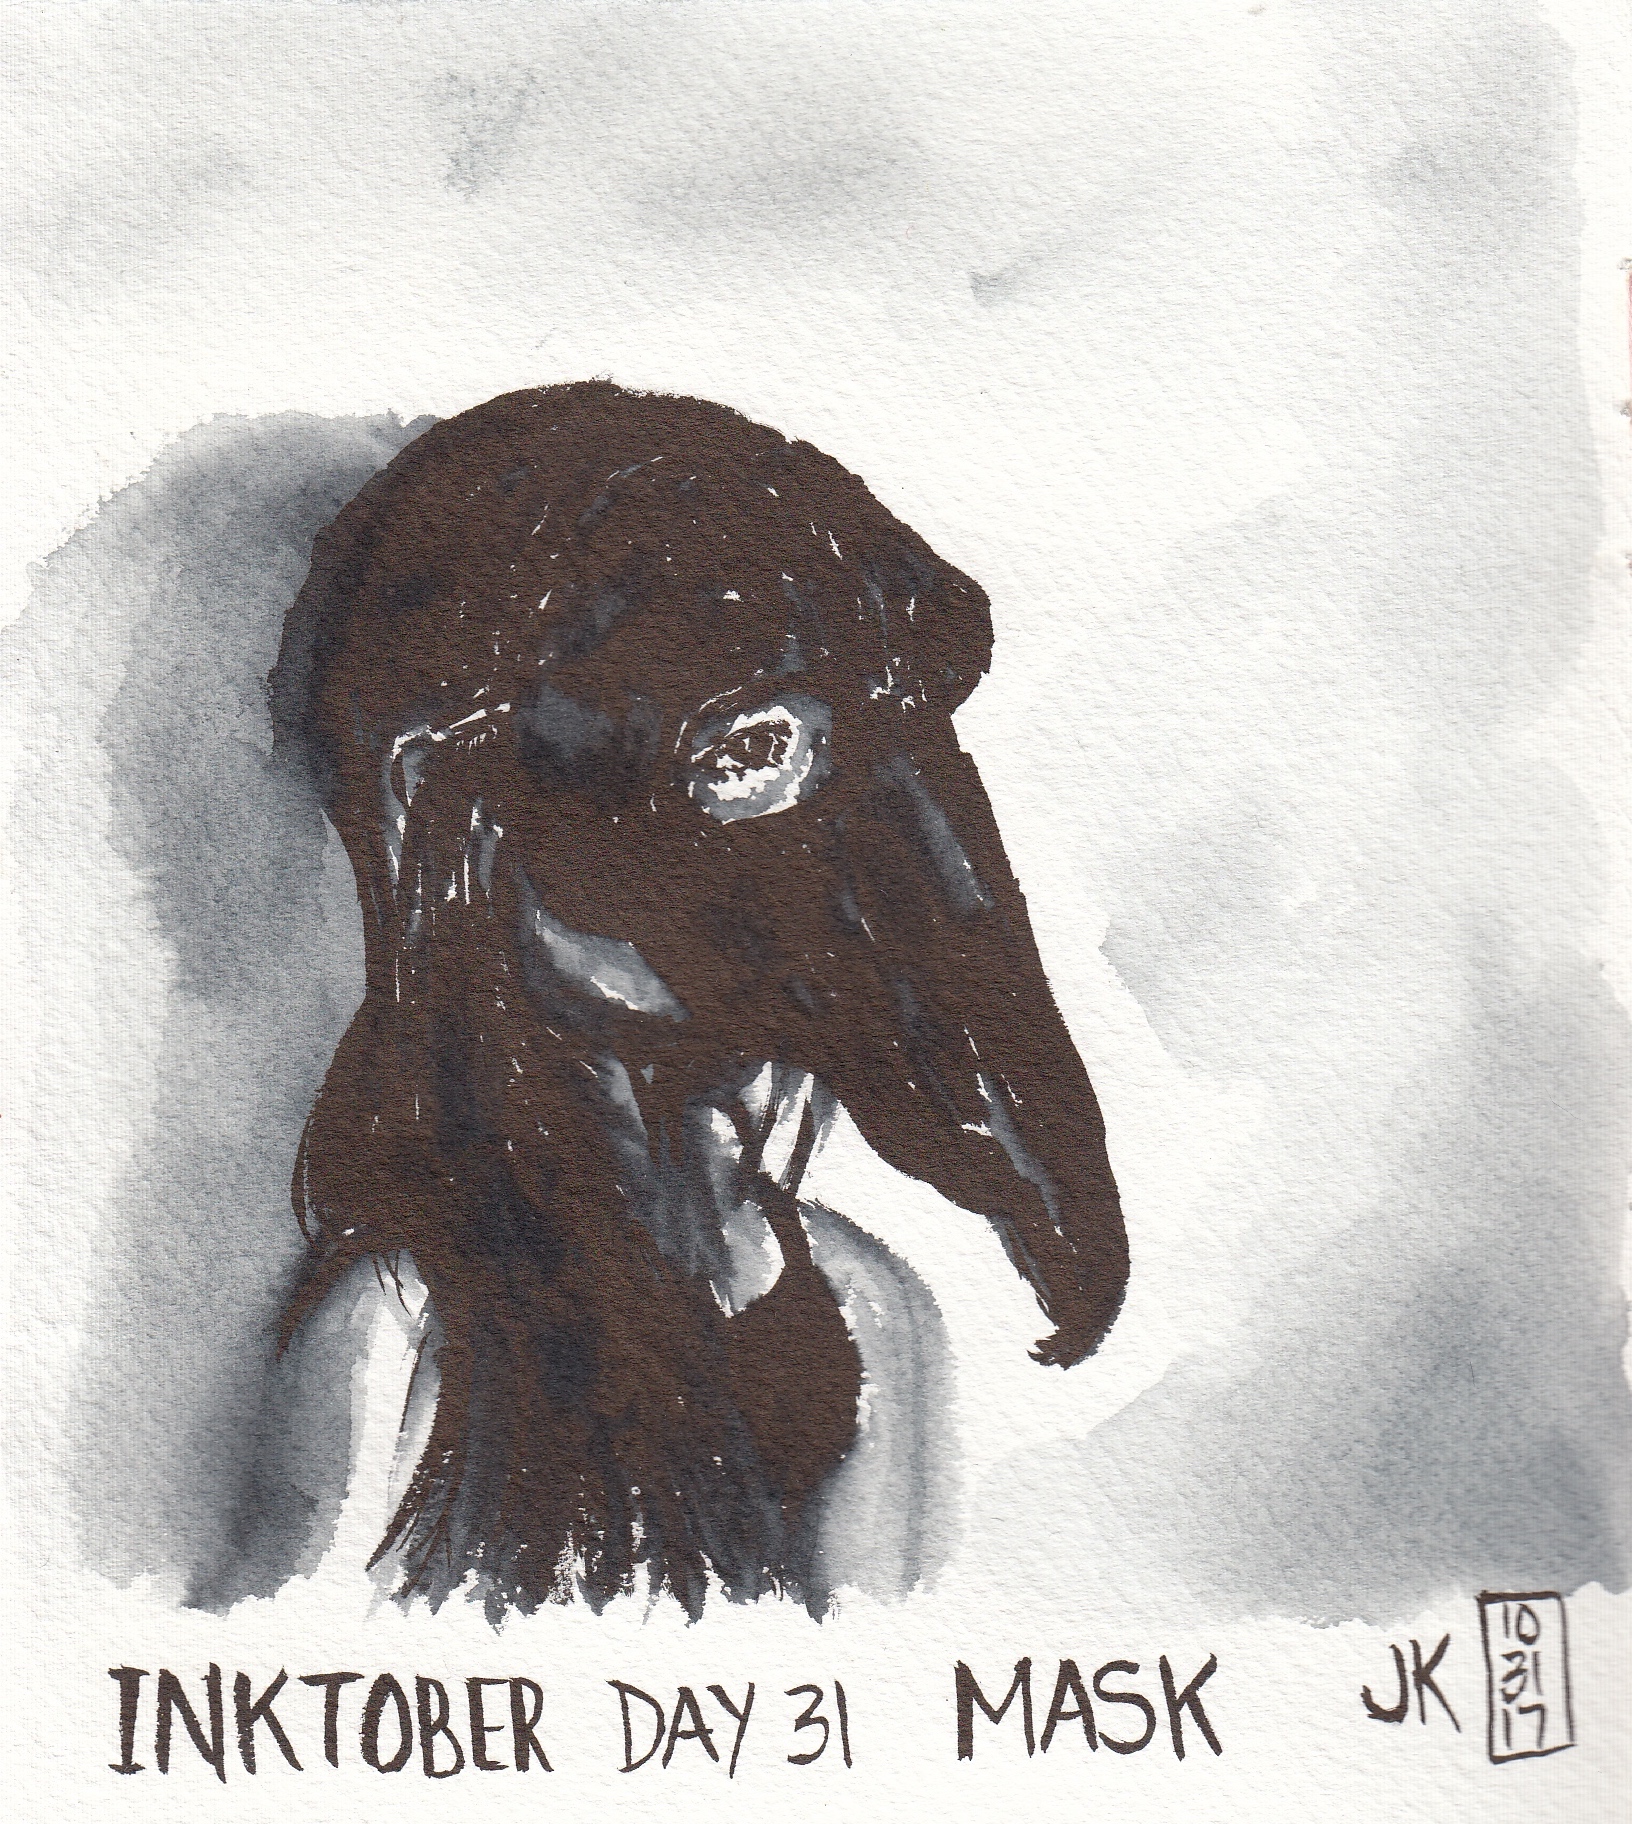 Day 31 - MASK